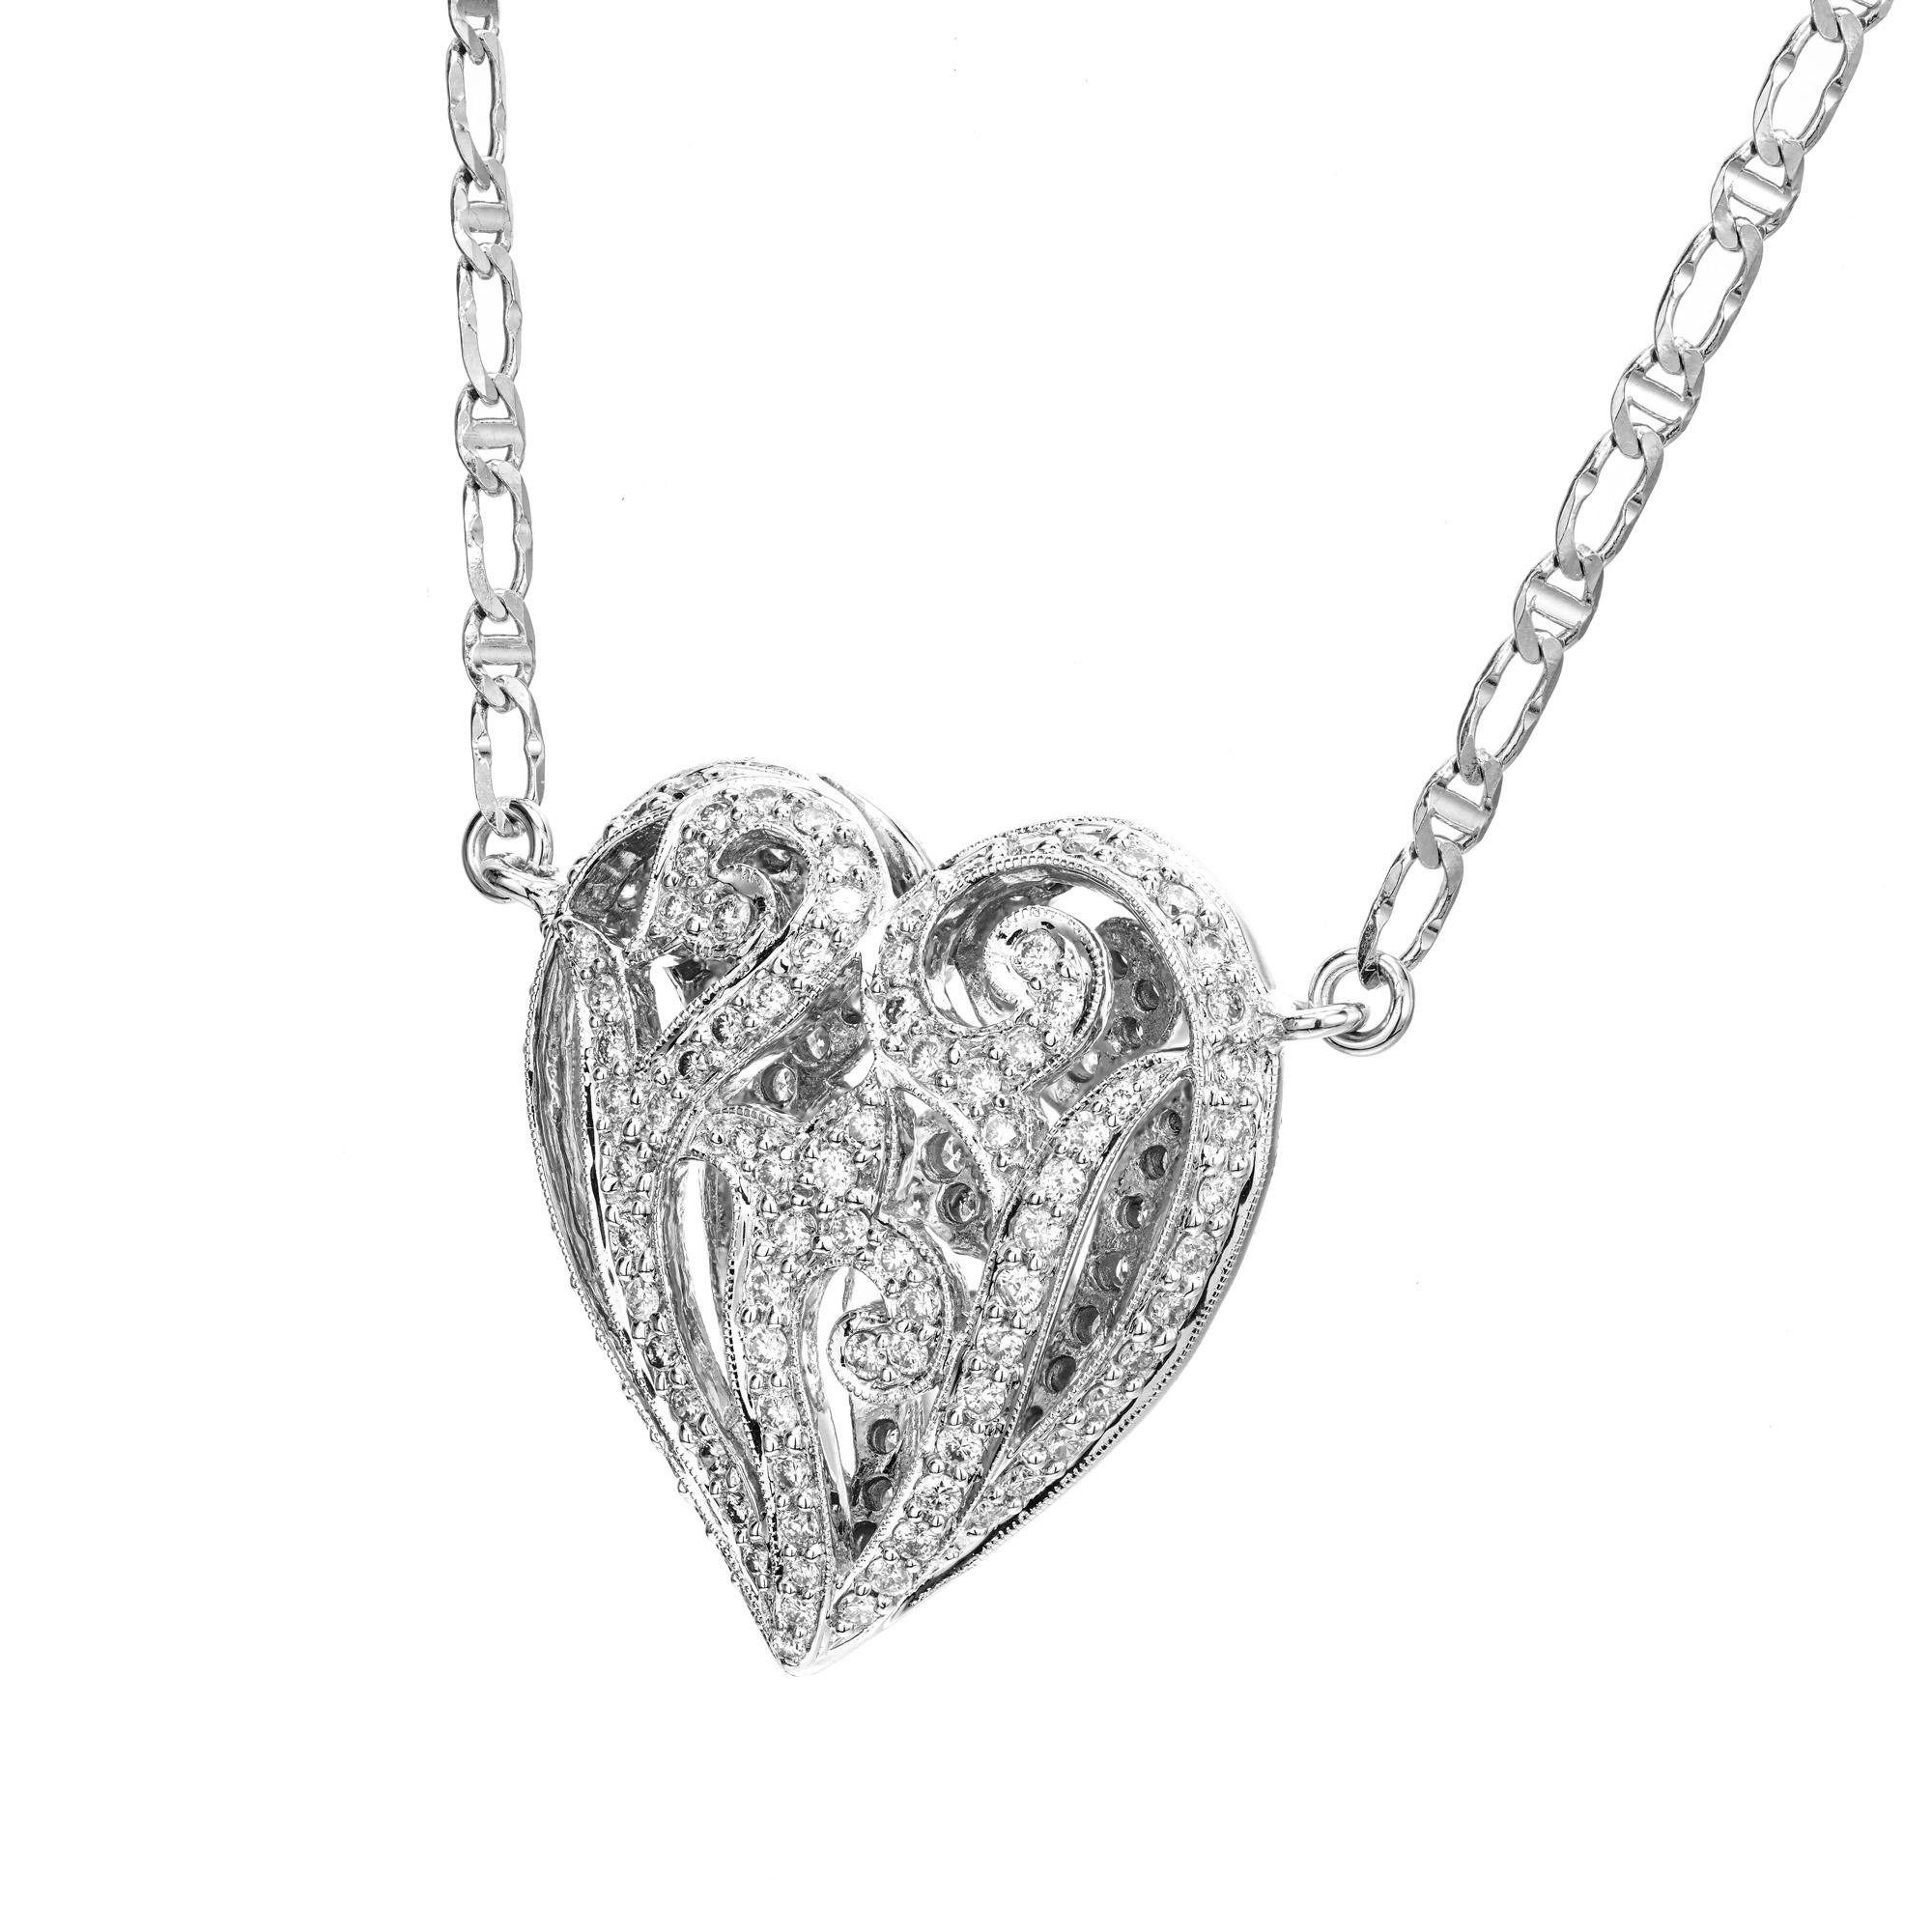 1970's Captivating diamond heart pendant necklace. This stunning puffed, dome heart shaped, cut out pendant is adorned with 196 pave set round brilliant cut diamonds totaling 1.75cts. The front and back of the pendant are identical. Made in 14k